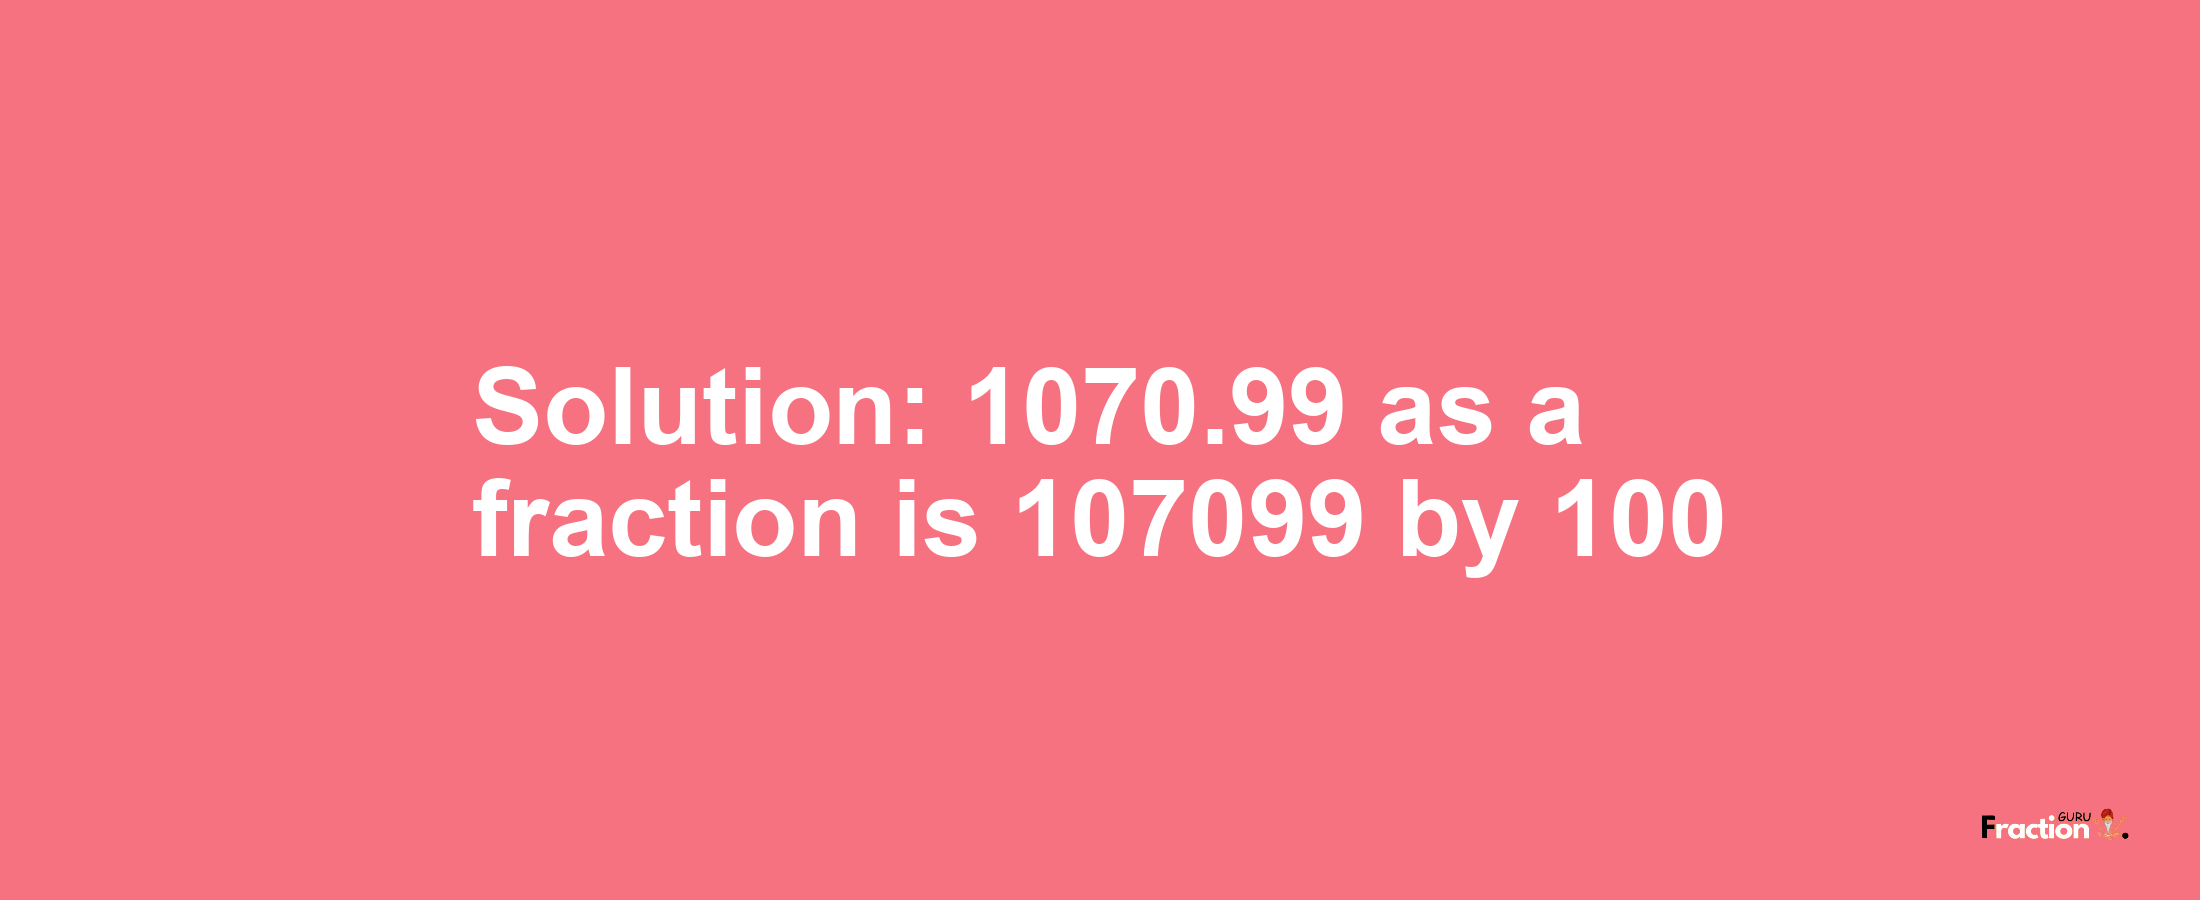 Solution:1070.99 as a fraction is 107099/100